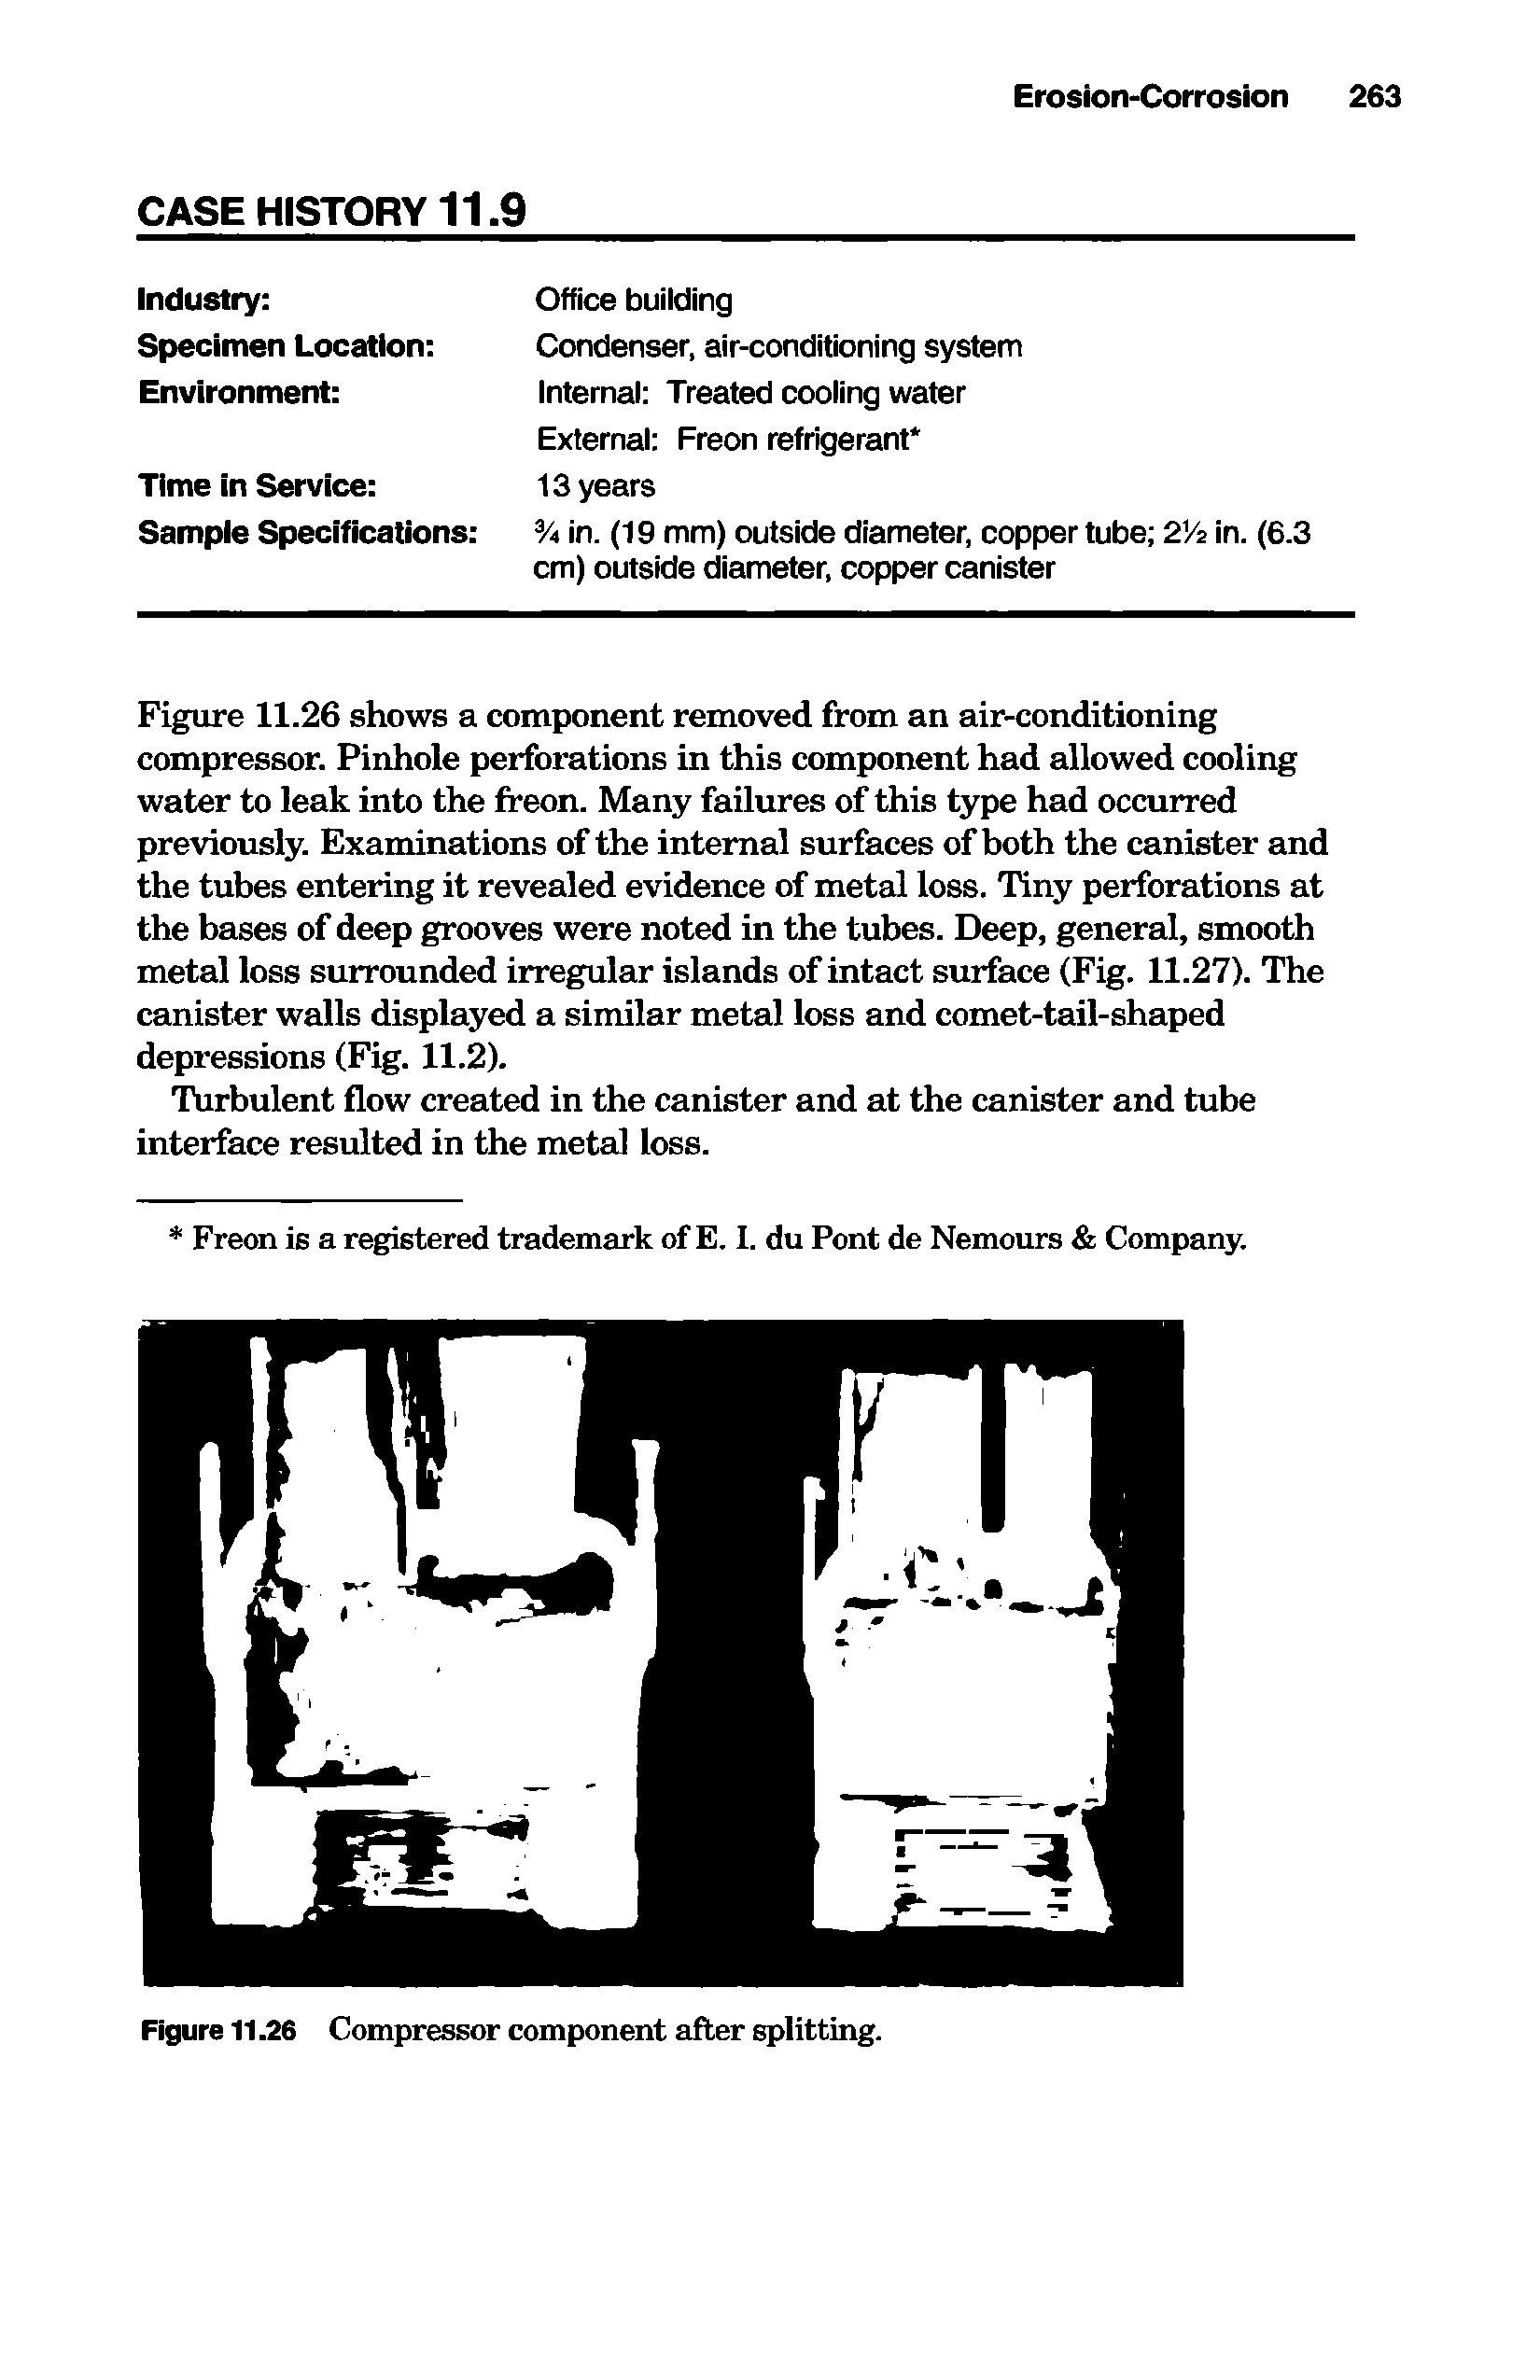 Figure 11.26 shows a component removed from an air-conditioning compressor. Pinhole perforations in this component had allowed cooling water to leak into the freon. Many failures of this type had occurred previously. Examinations of the internal surfaces of both the canister and the tubes entering it revealed evidence of metal loss. Tiny perforations at the bases of deep grooves were noted in the tubes. Deep, general, smooth metal loss surrounded irregular islands of intact surface (Fig. 11.27). The canister walls displayed a similar metal loss and comet-tail-shaped depressions (Fig. 11.2).